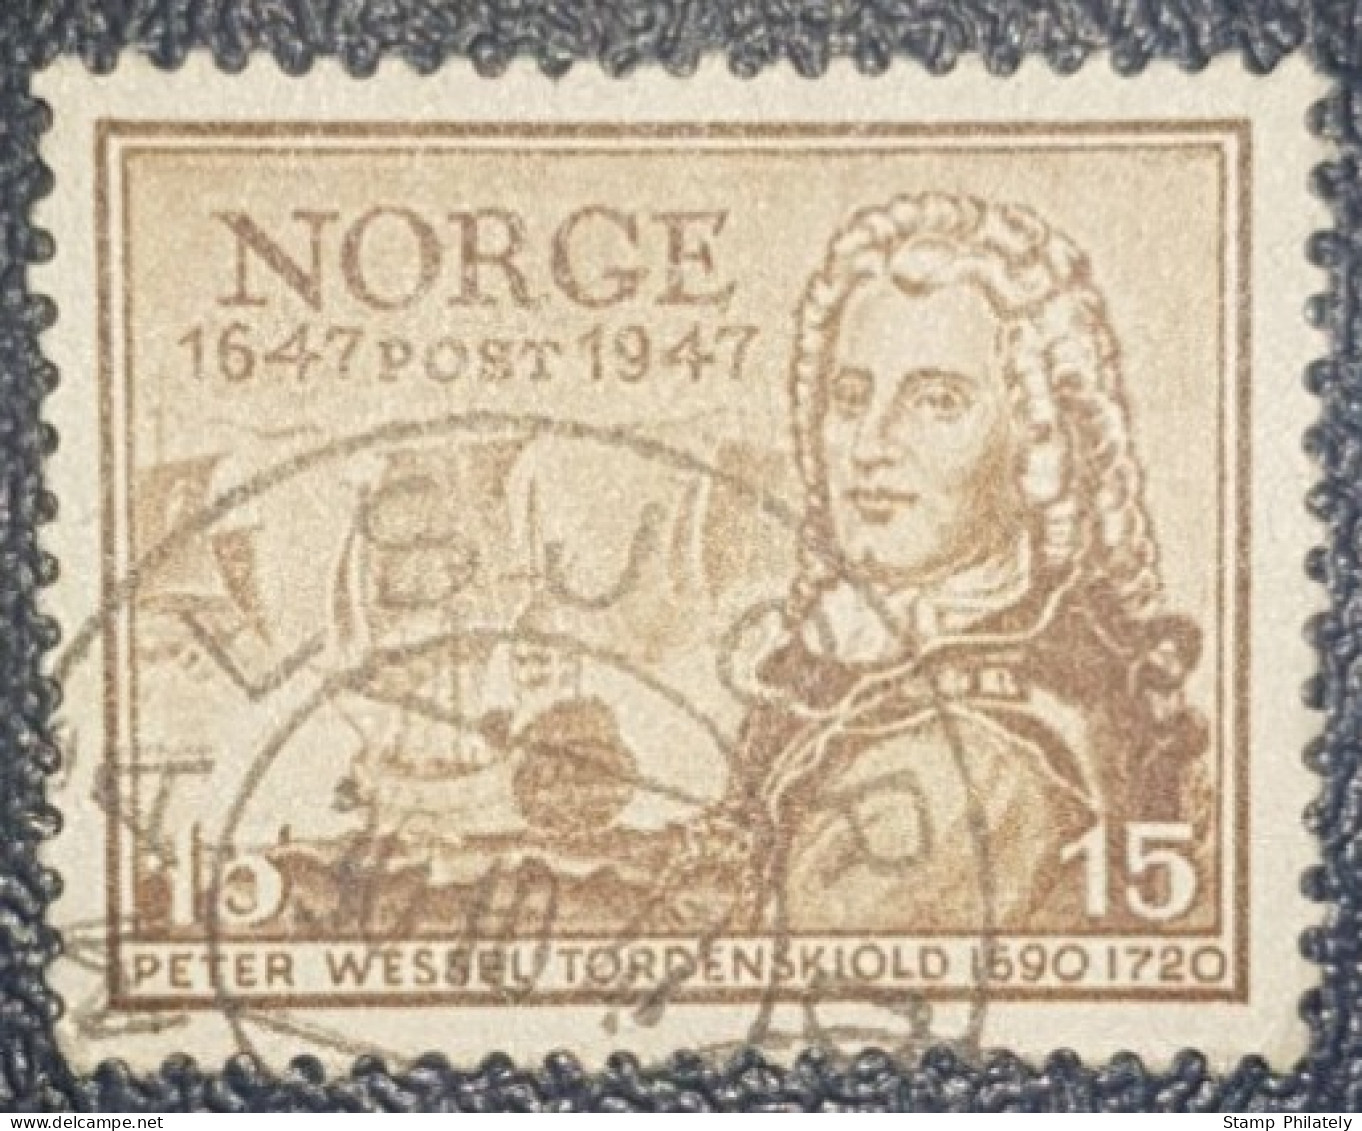 Norway Used Postmark Stamp 1947 Norwegian Mail Service - Used Stamps